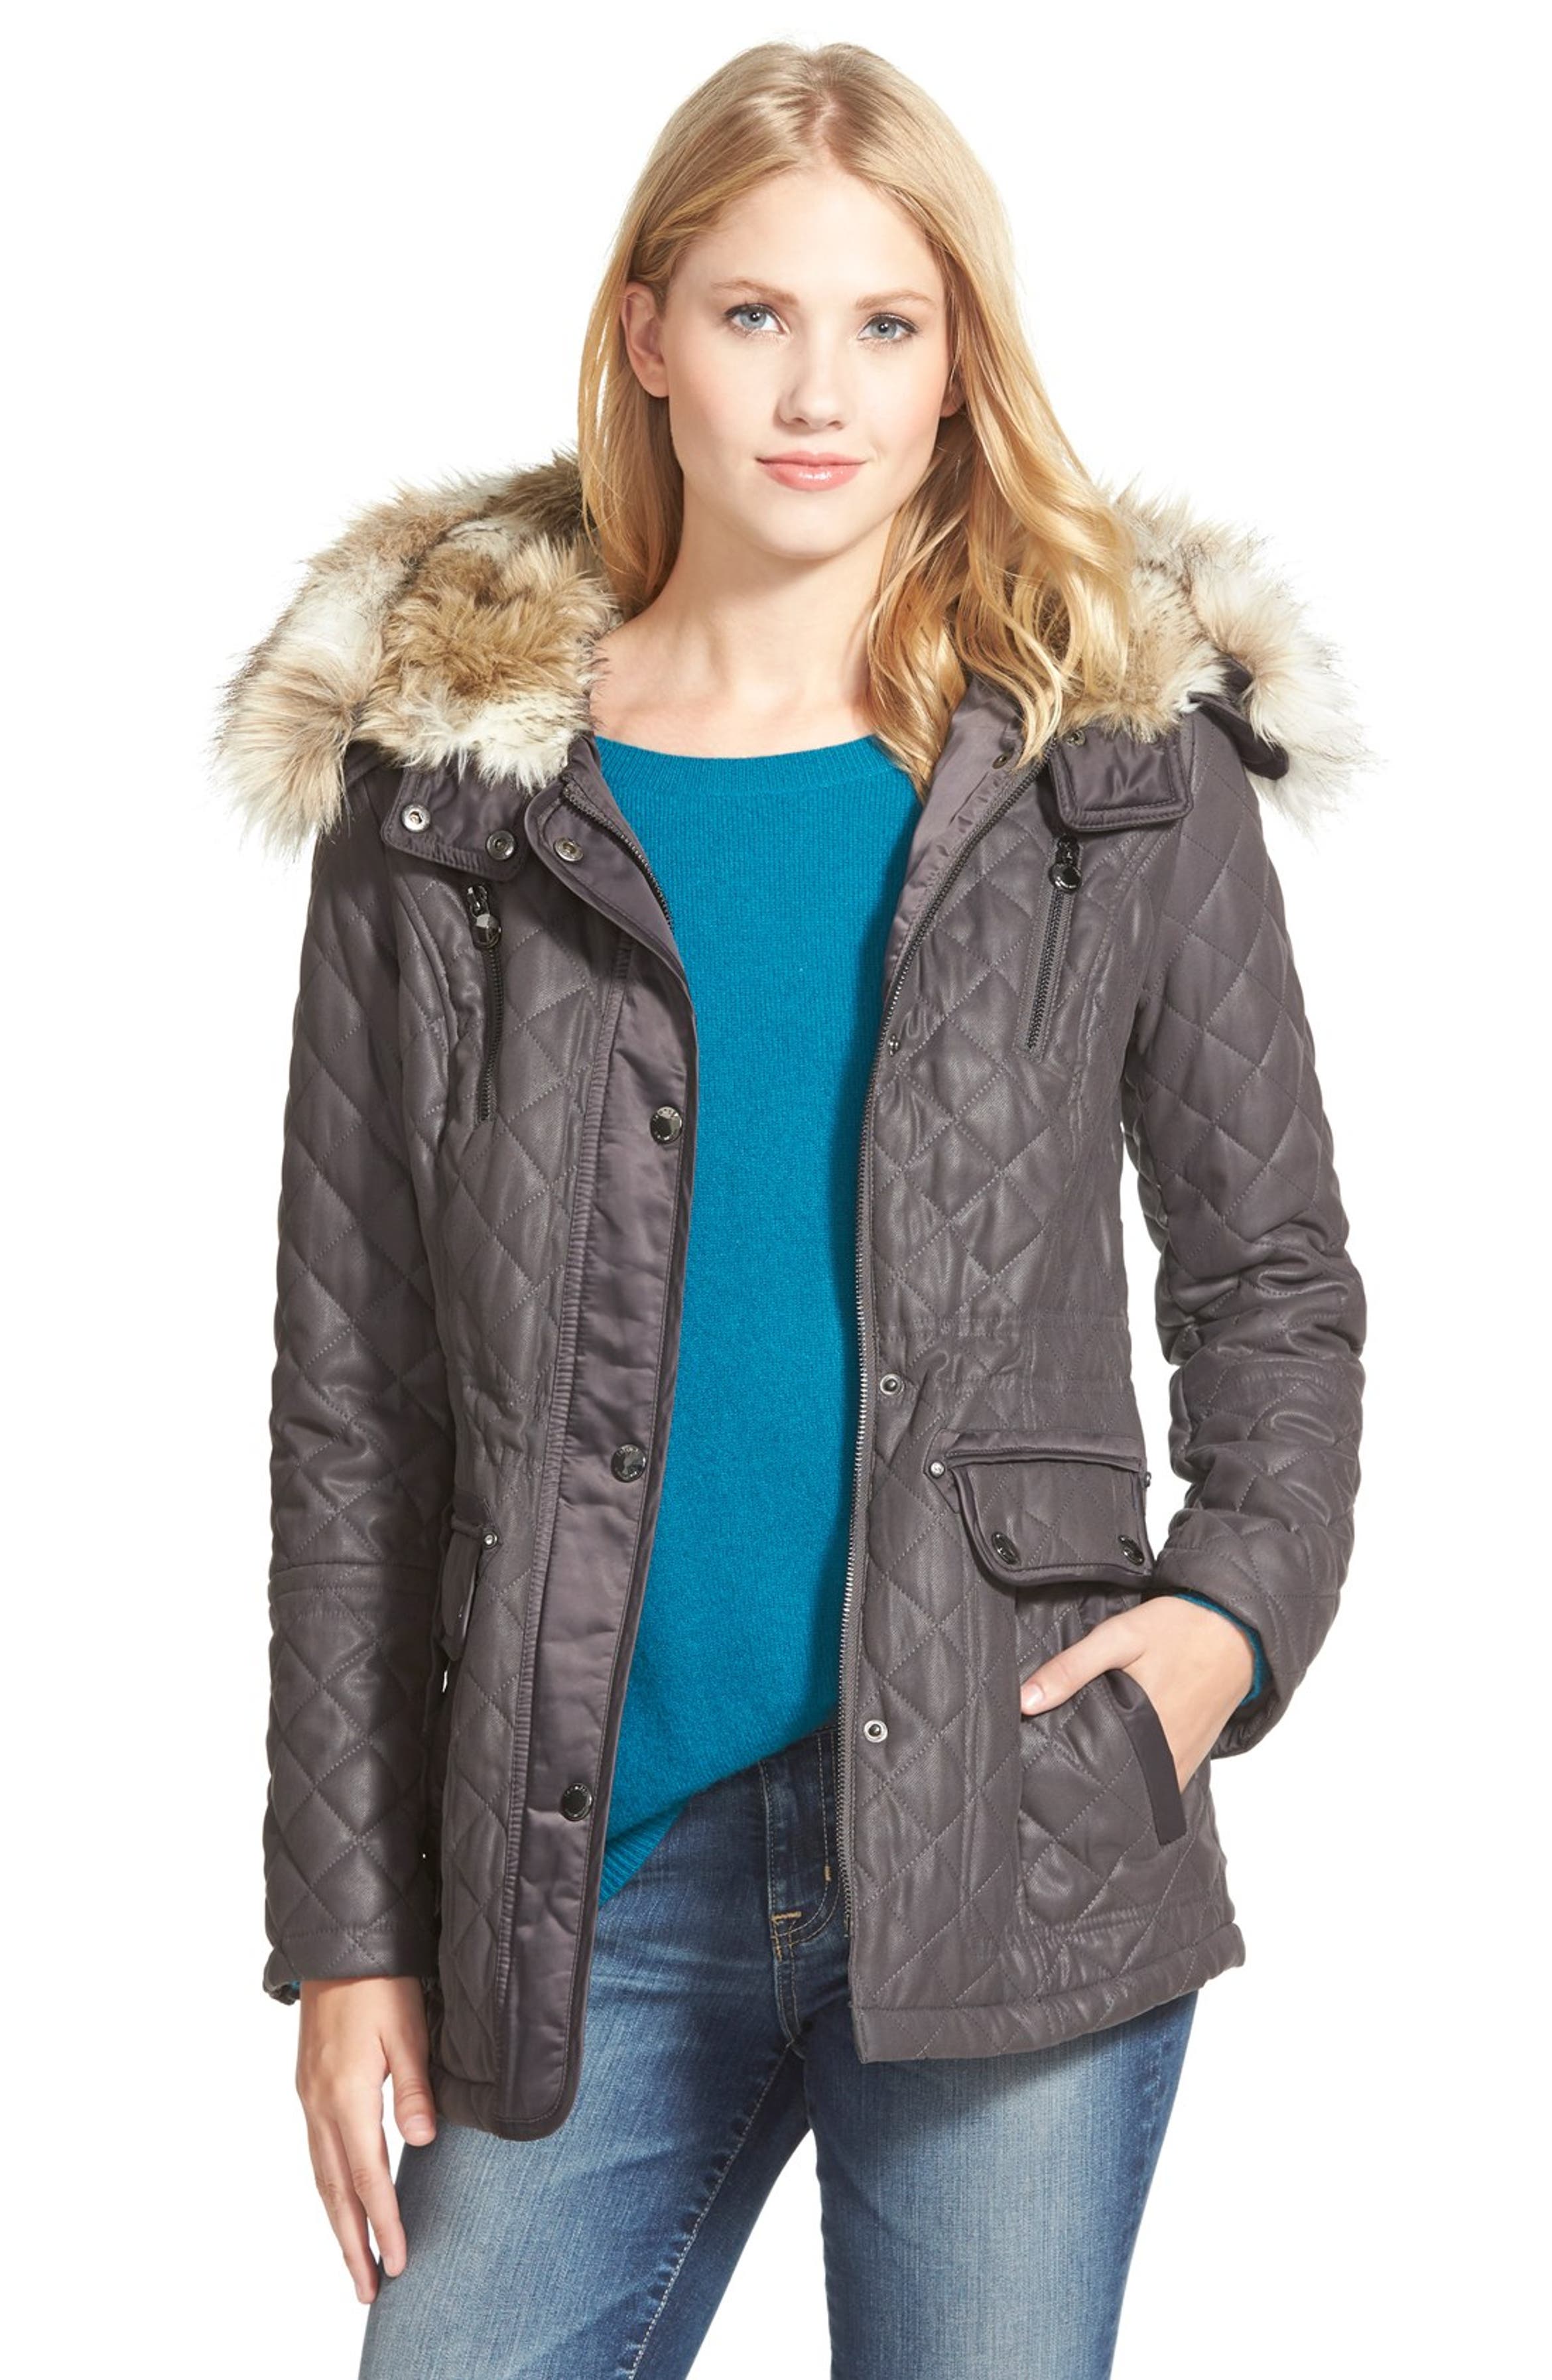 Laundry by Shelli Segal Waxy Twill Quilted Jacket with Faux Fur | Nordstrom